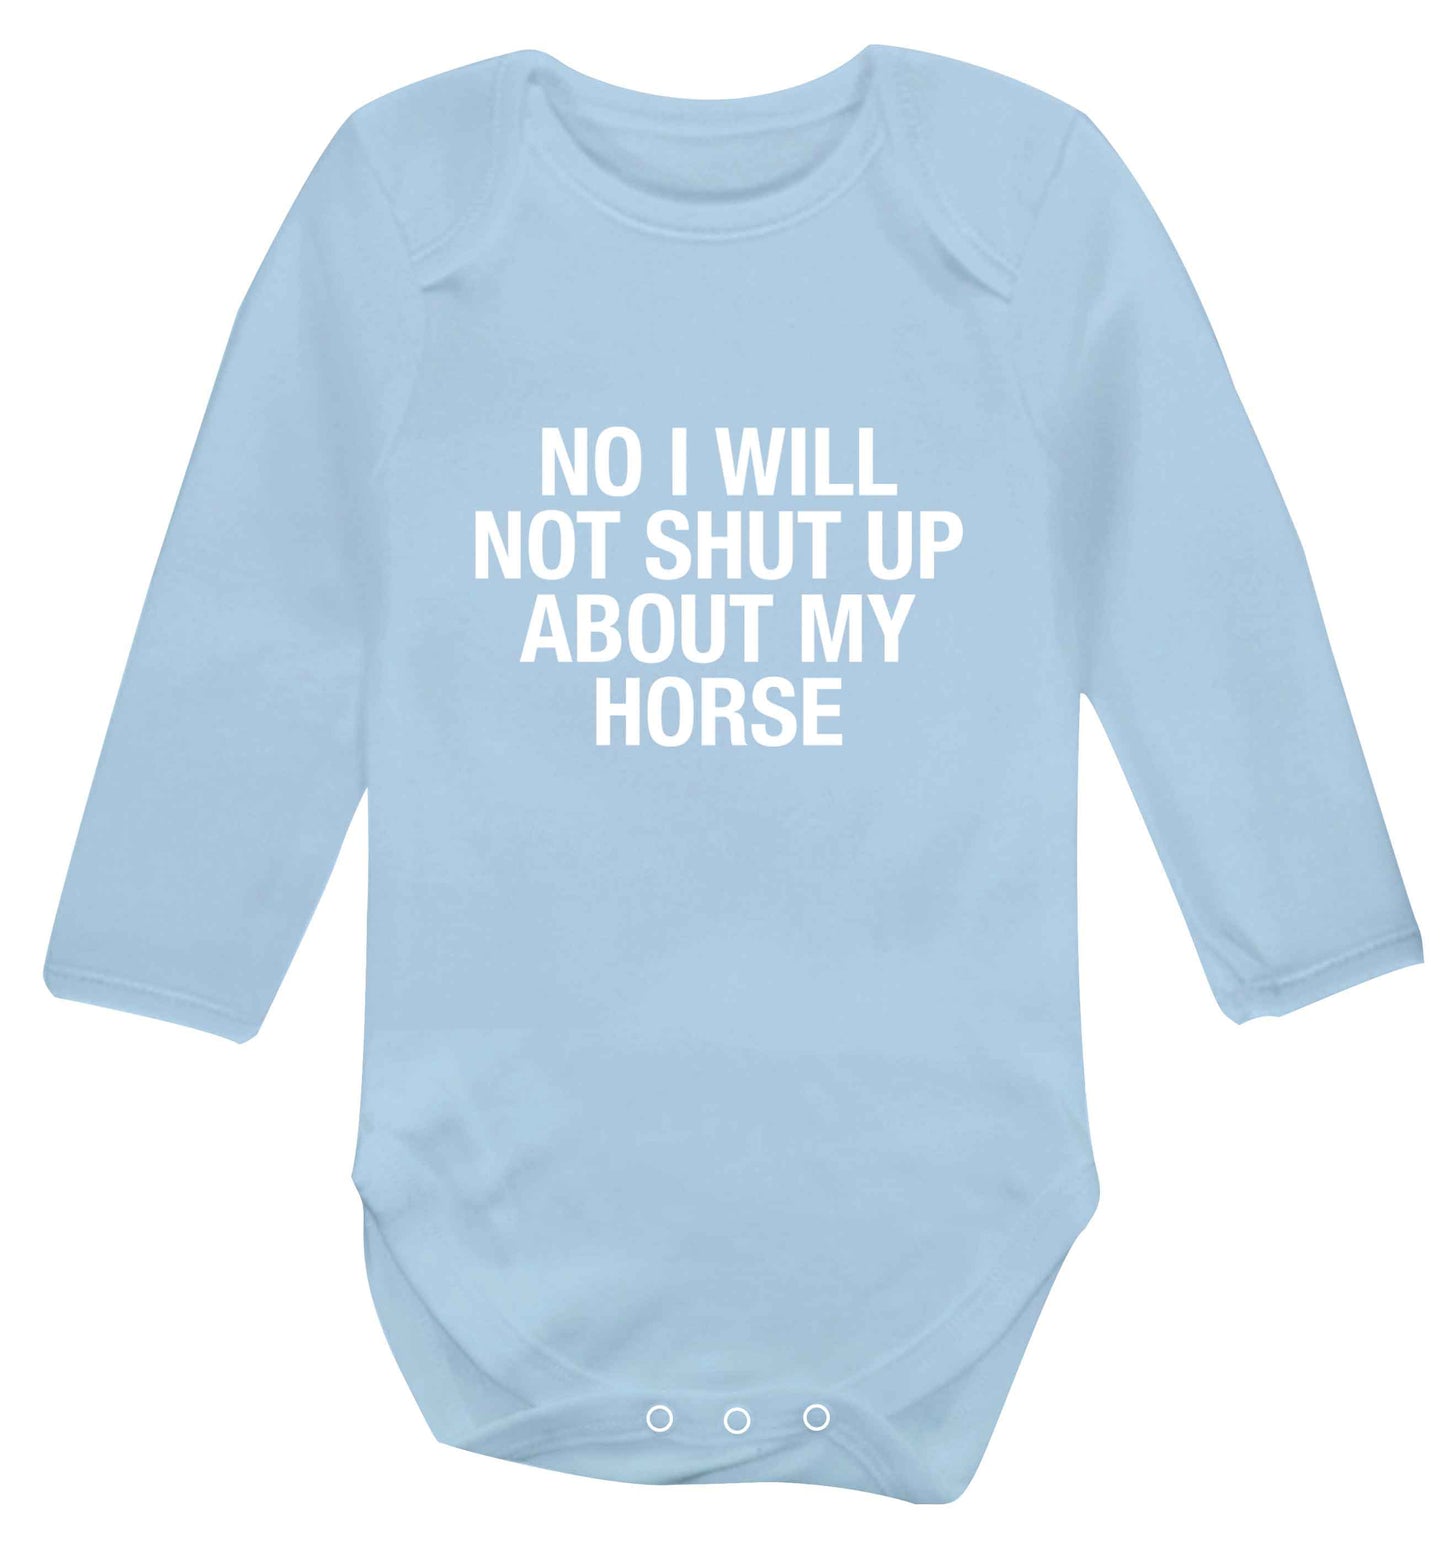 No I will not shut up talking about my horse baby vest long sleeved pale blue 6-12 months